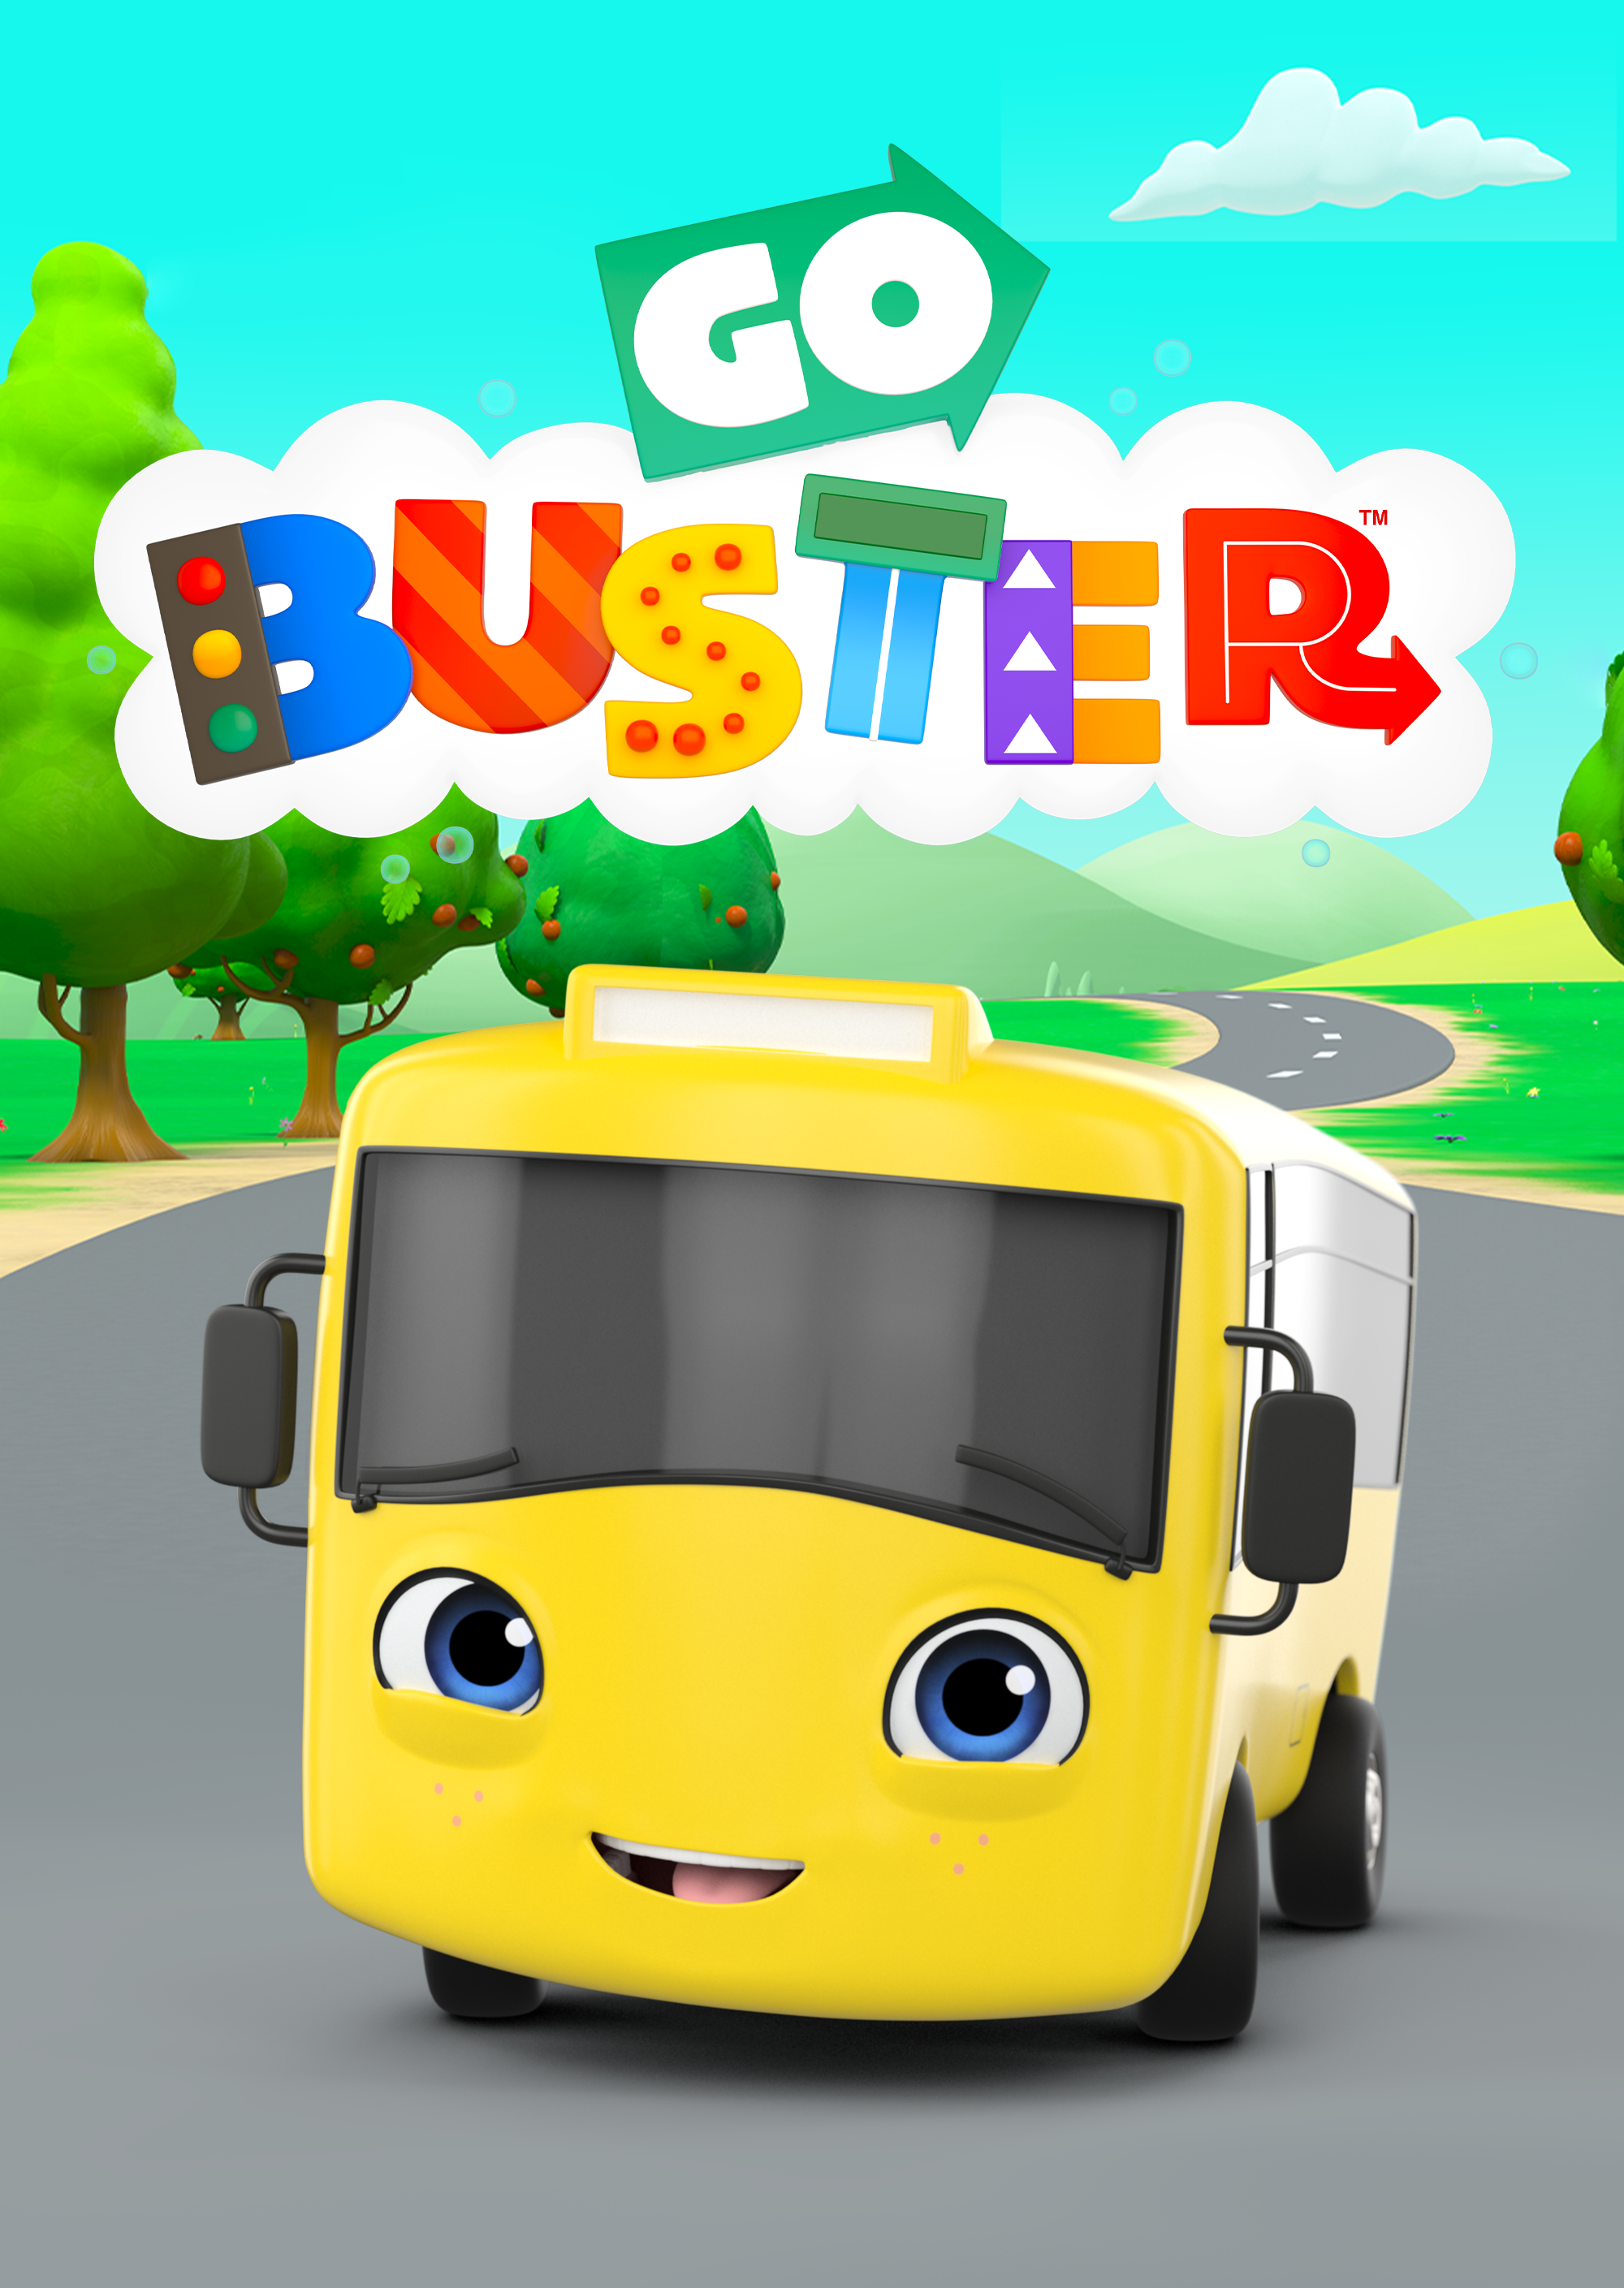 Go Buster!